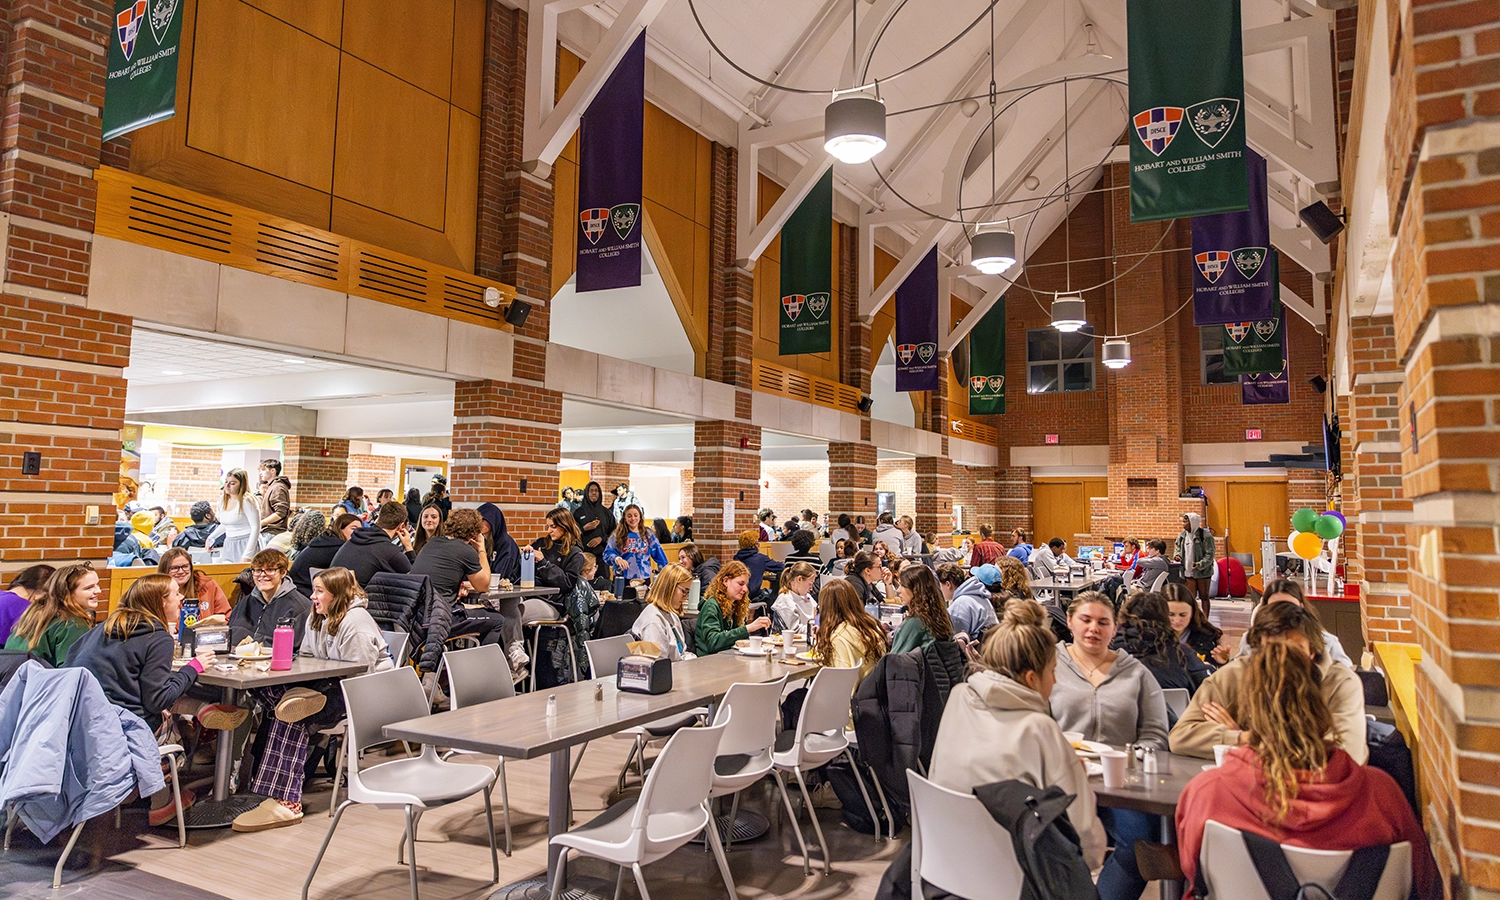  Students gather in the Great Hall of Saga for the annual midnight breakfast before the first day of final exams.